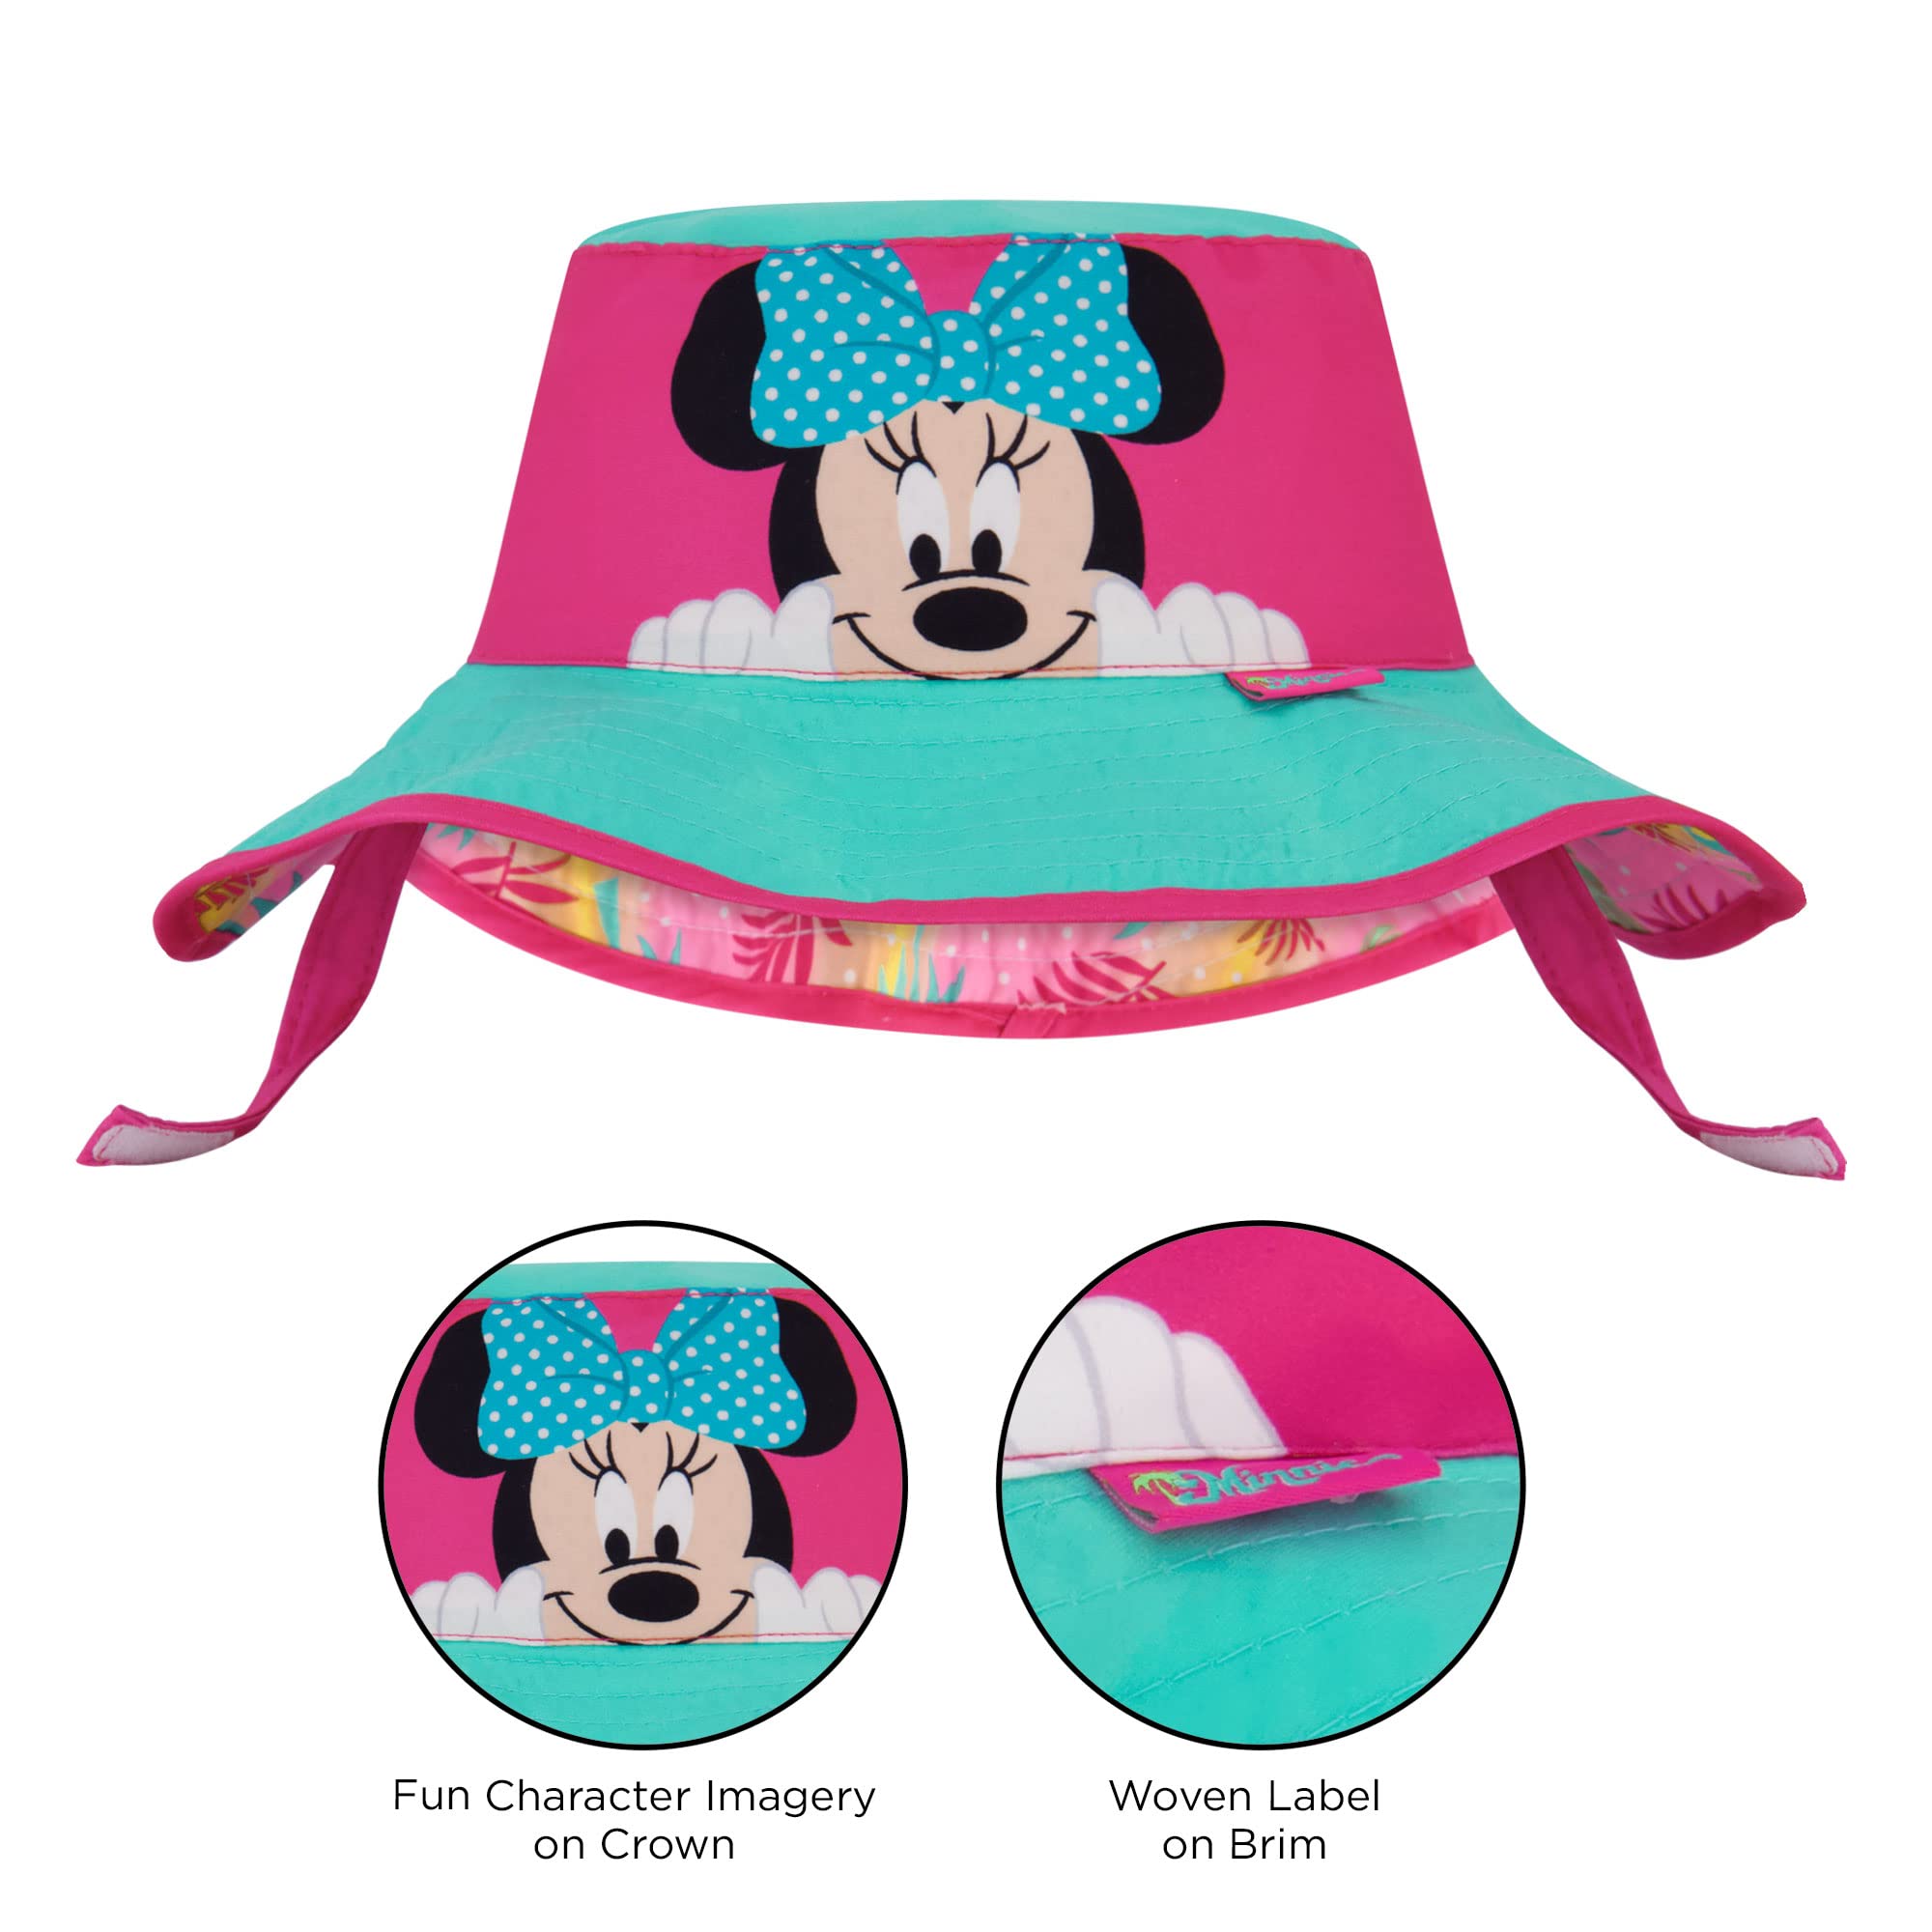 Disney Girls Rash Guard Set with Bucket Hat and Sunglasses, Minnie Mouse, Ages 3-8